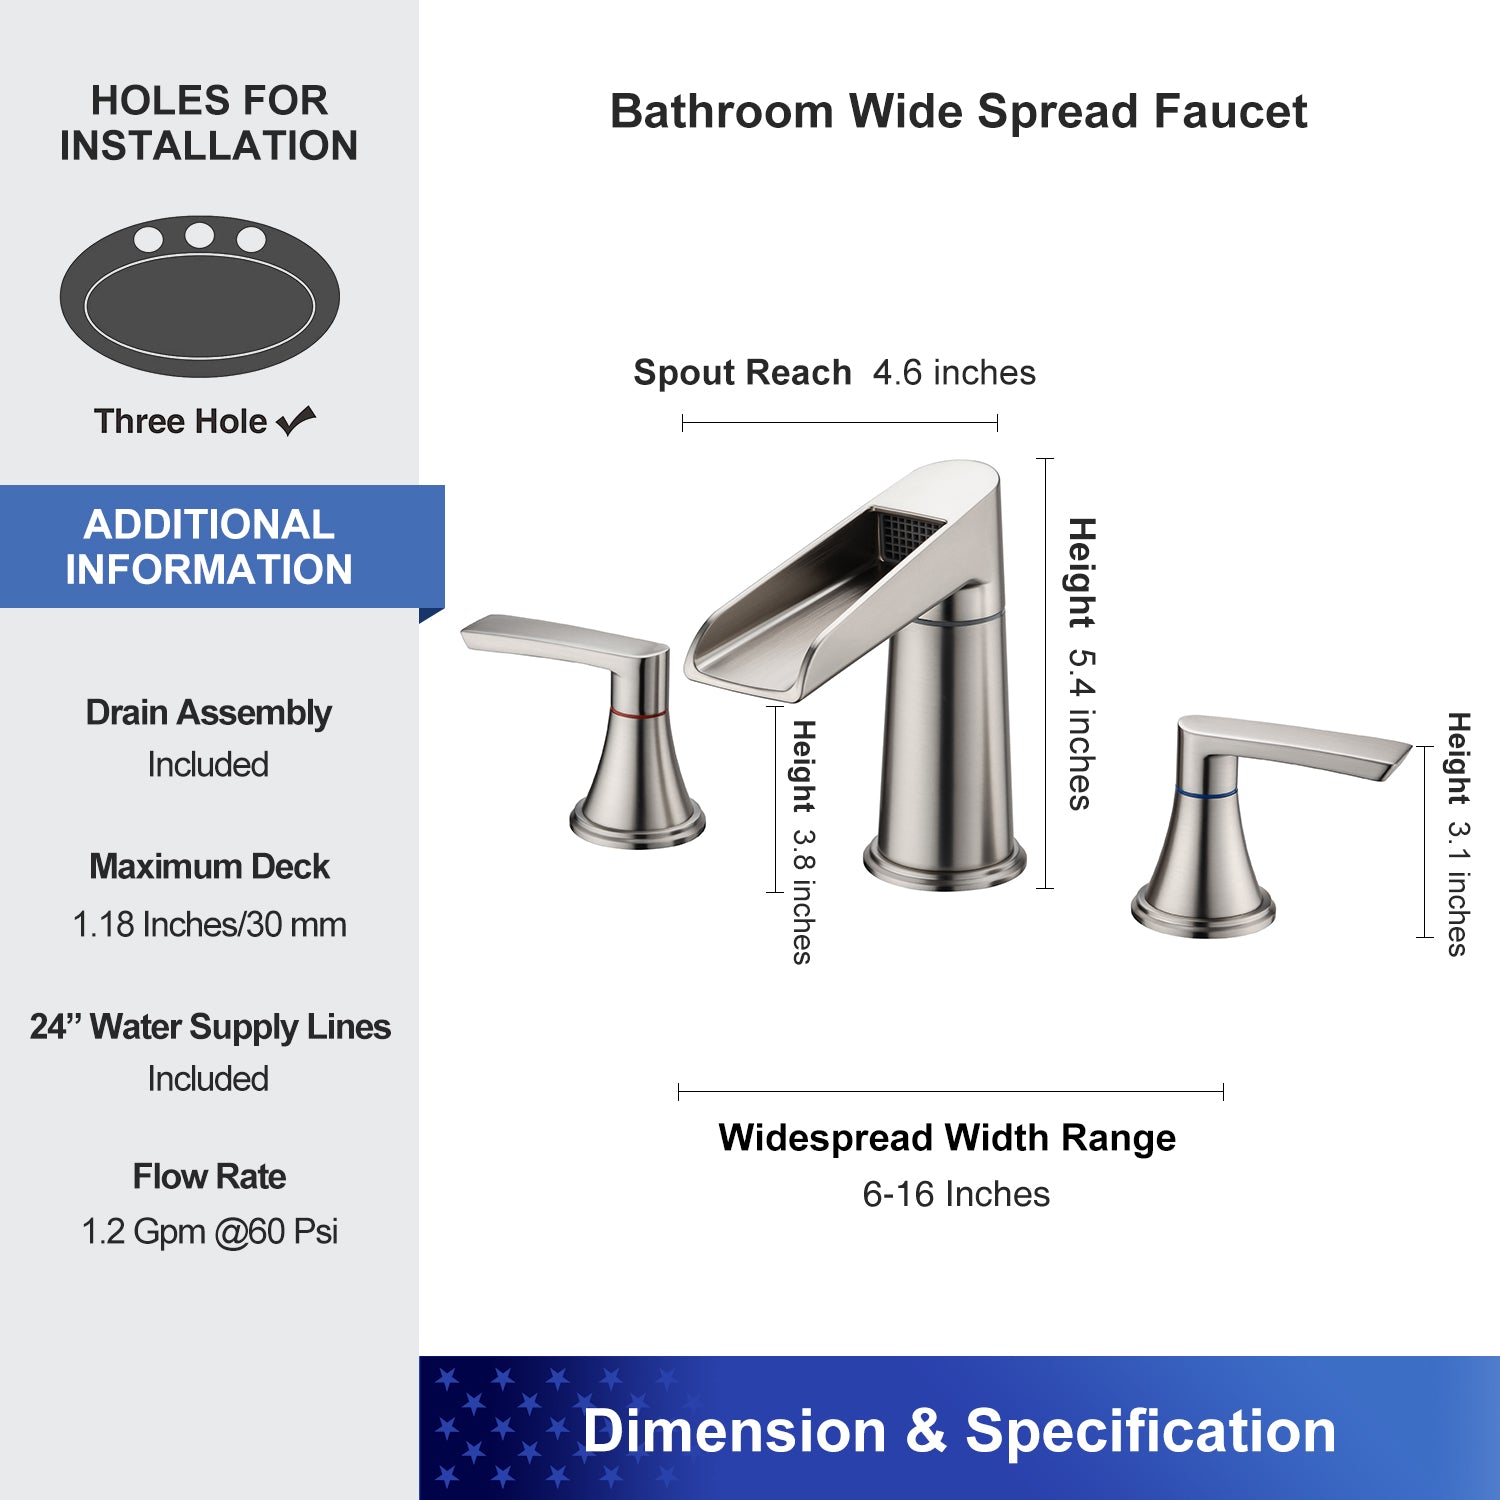 Widespread Faucet 2-handle Bathroom Faucet with Drain Assembly RX83005